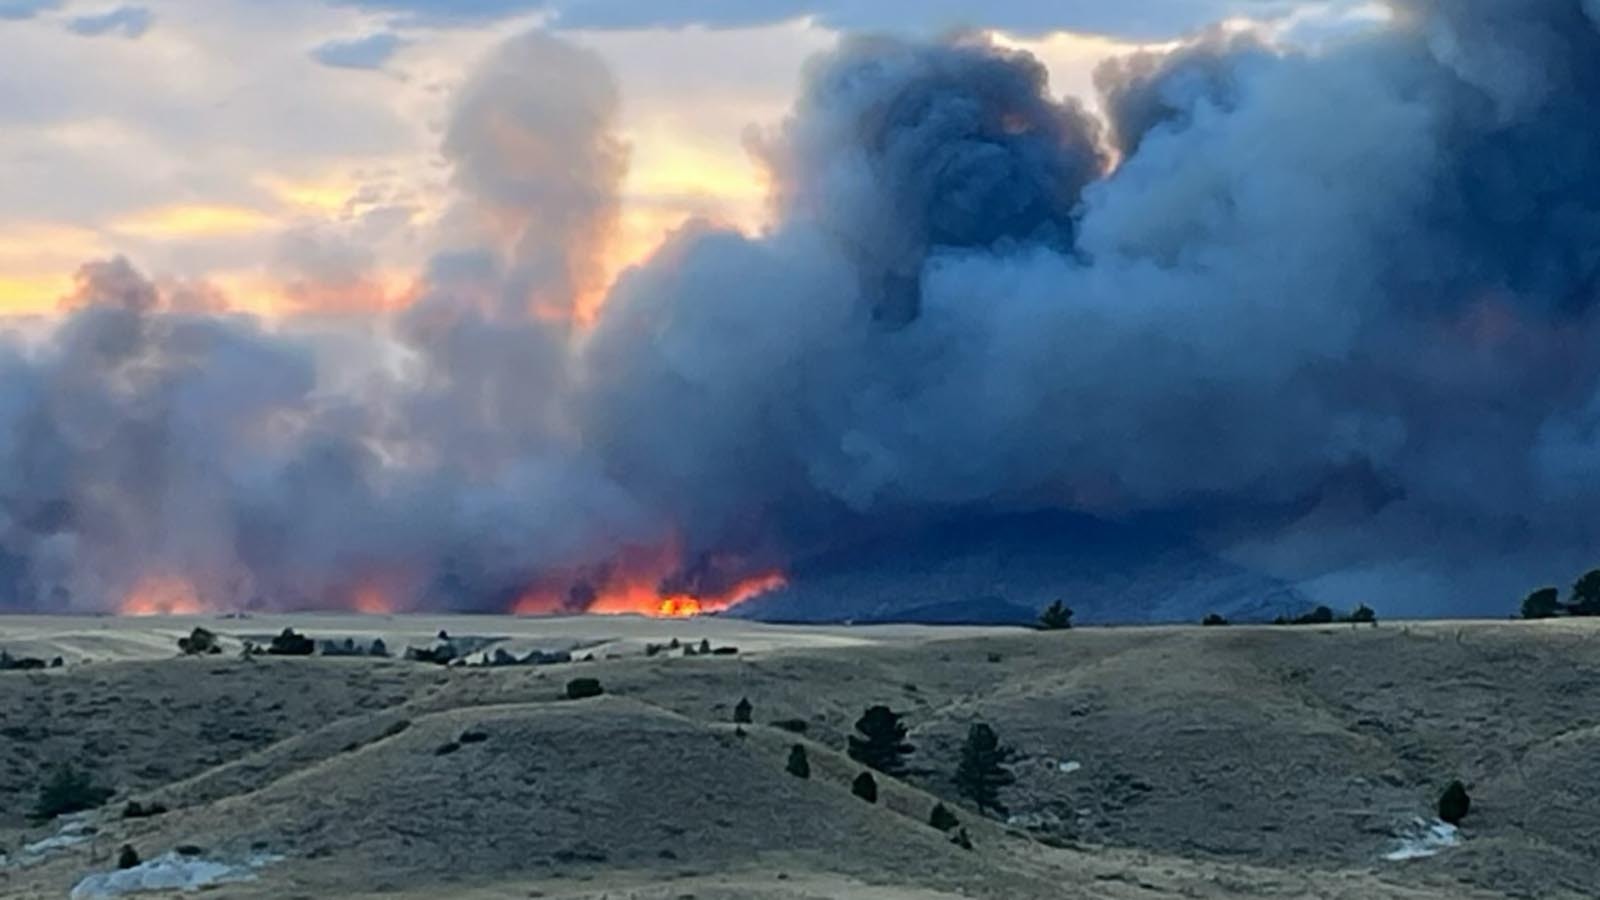 The hills are on fire along U.S. Highway 26 between Guernsey and Fort Laramie, Wyoming.